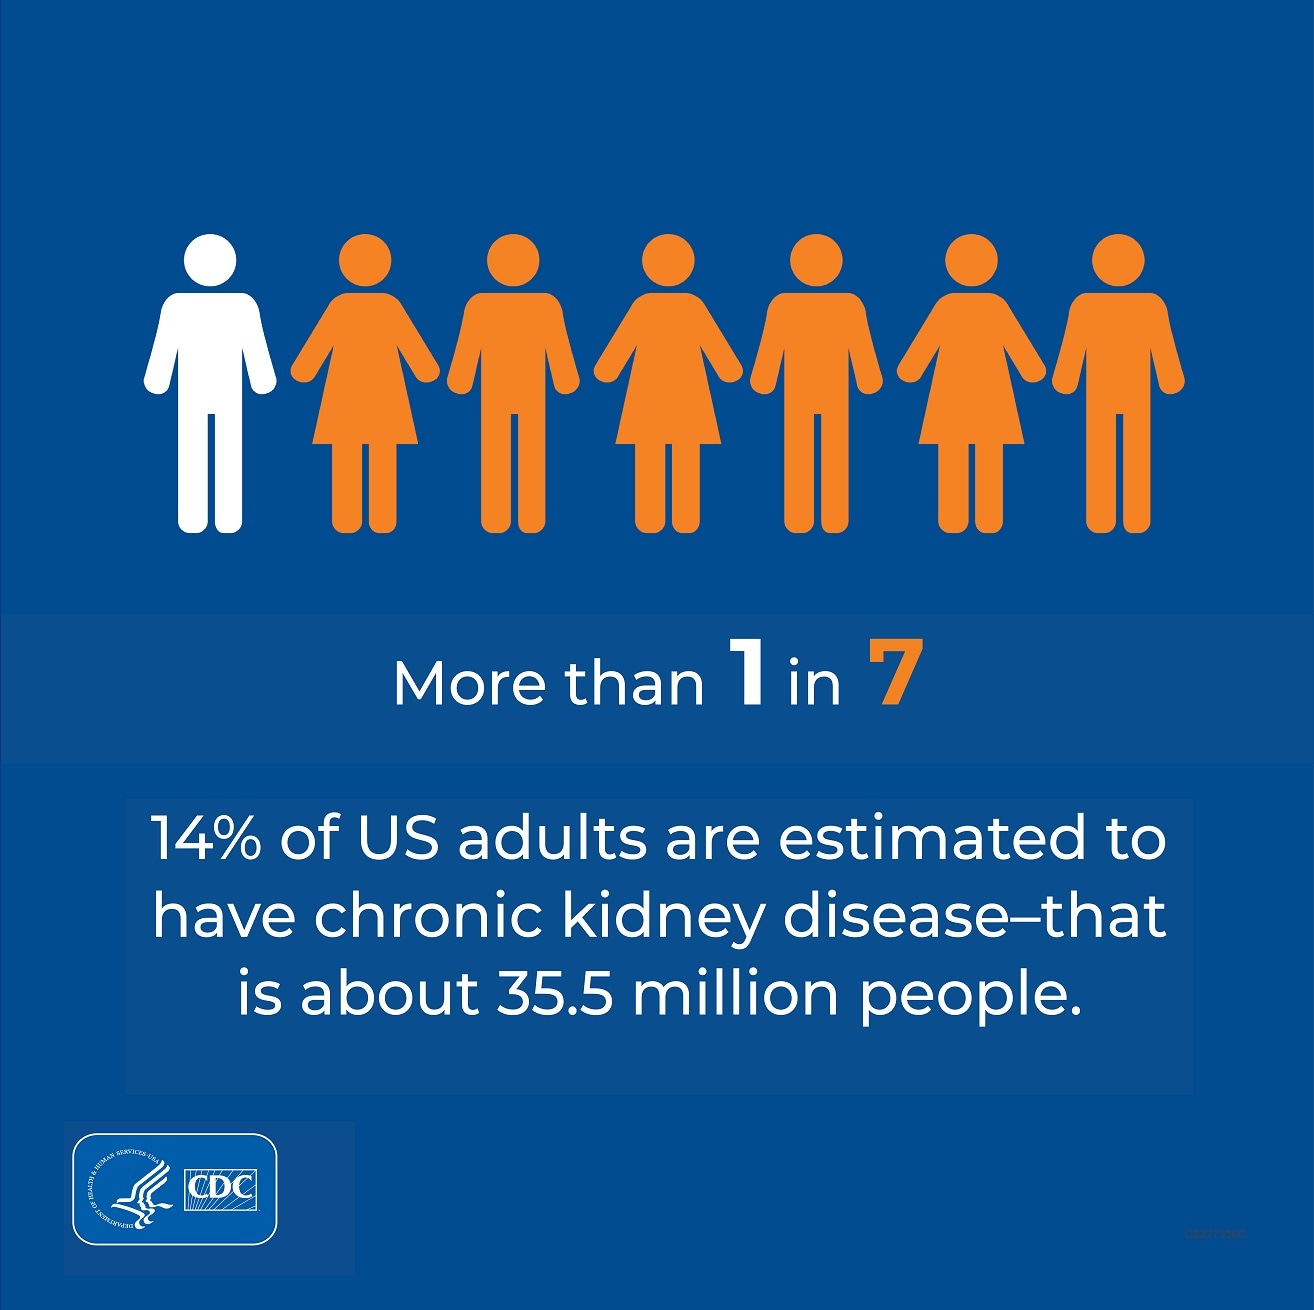 More than 1 in 7. 14% of US adults are estimated to have chronic kidney disease. That is about 35.5 million people.